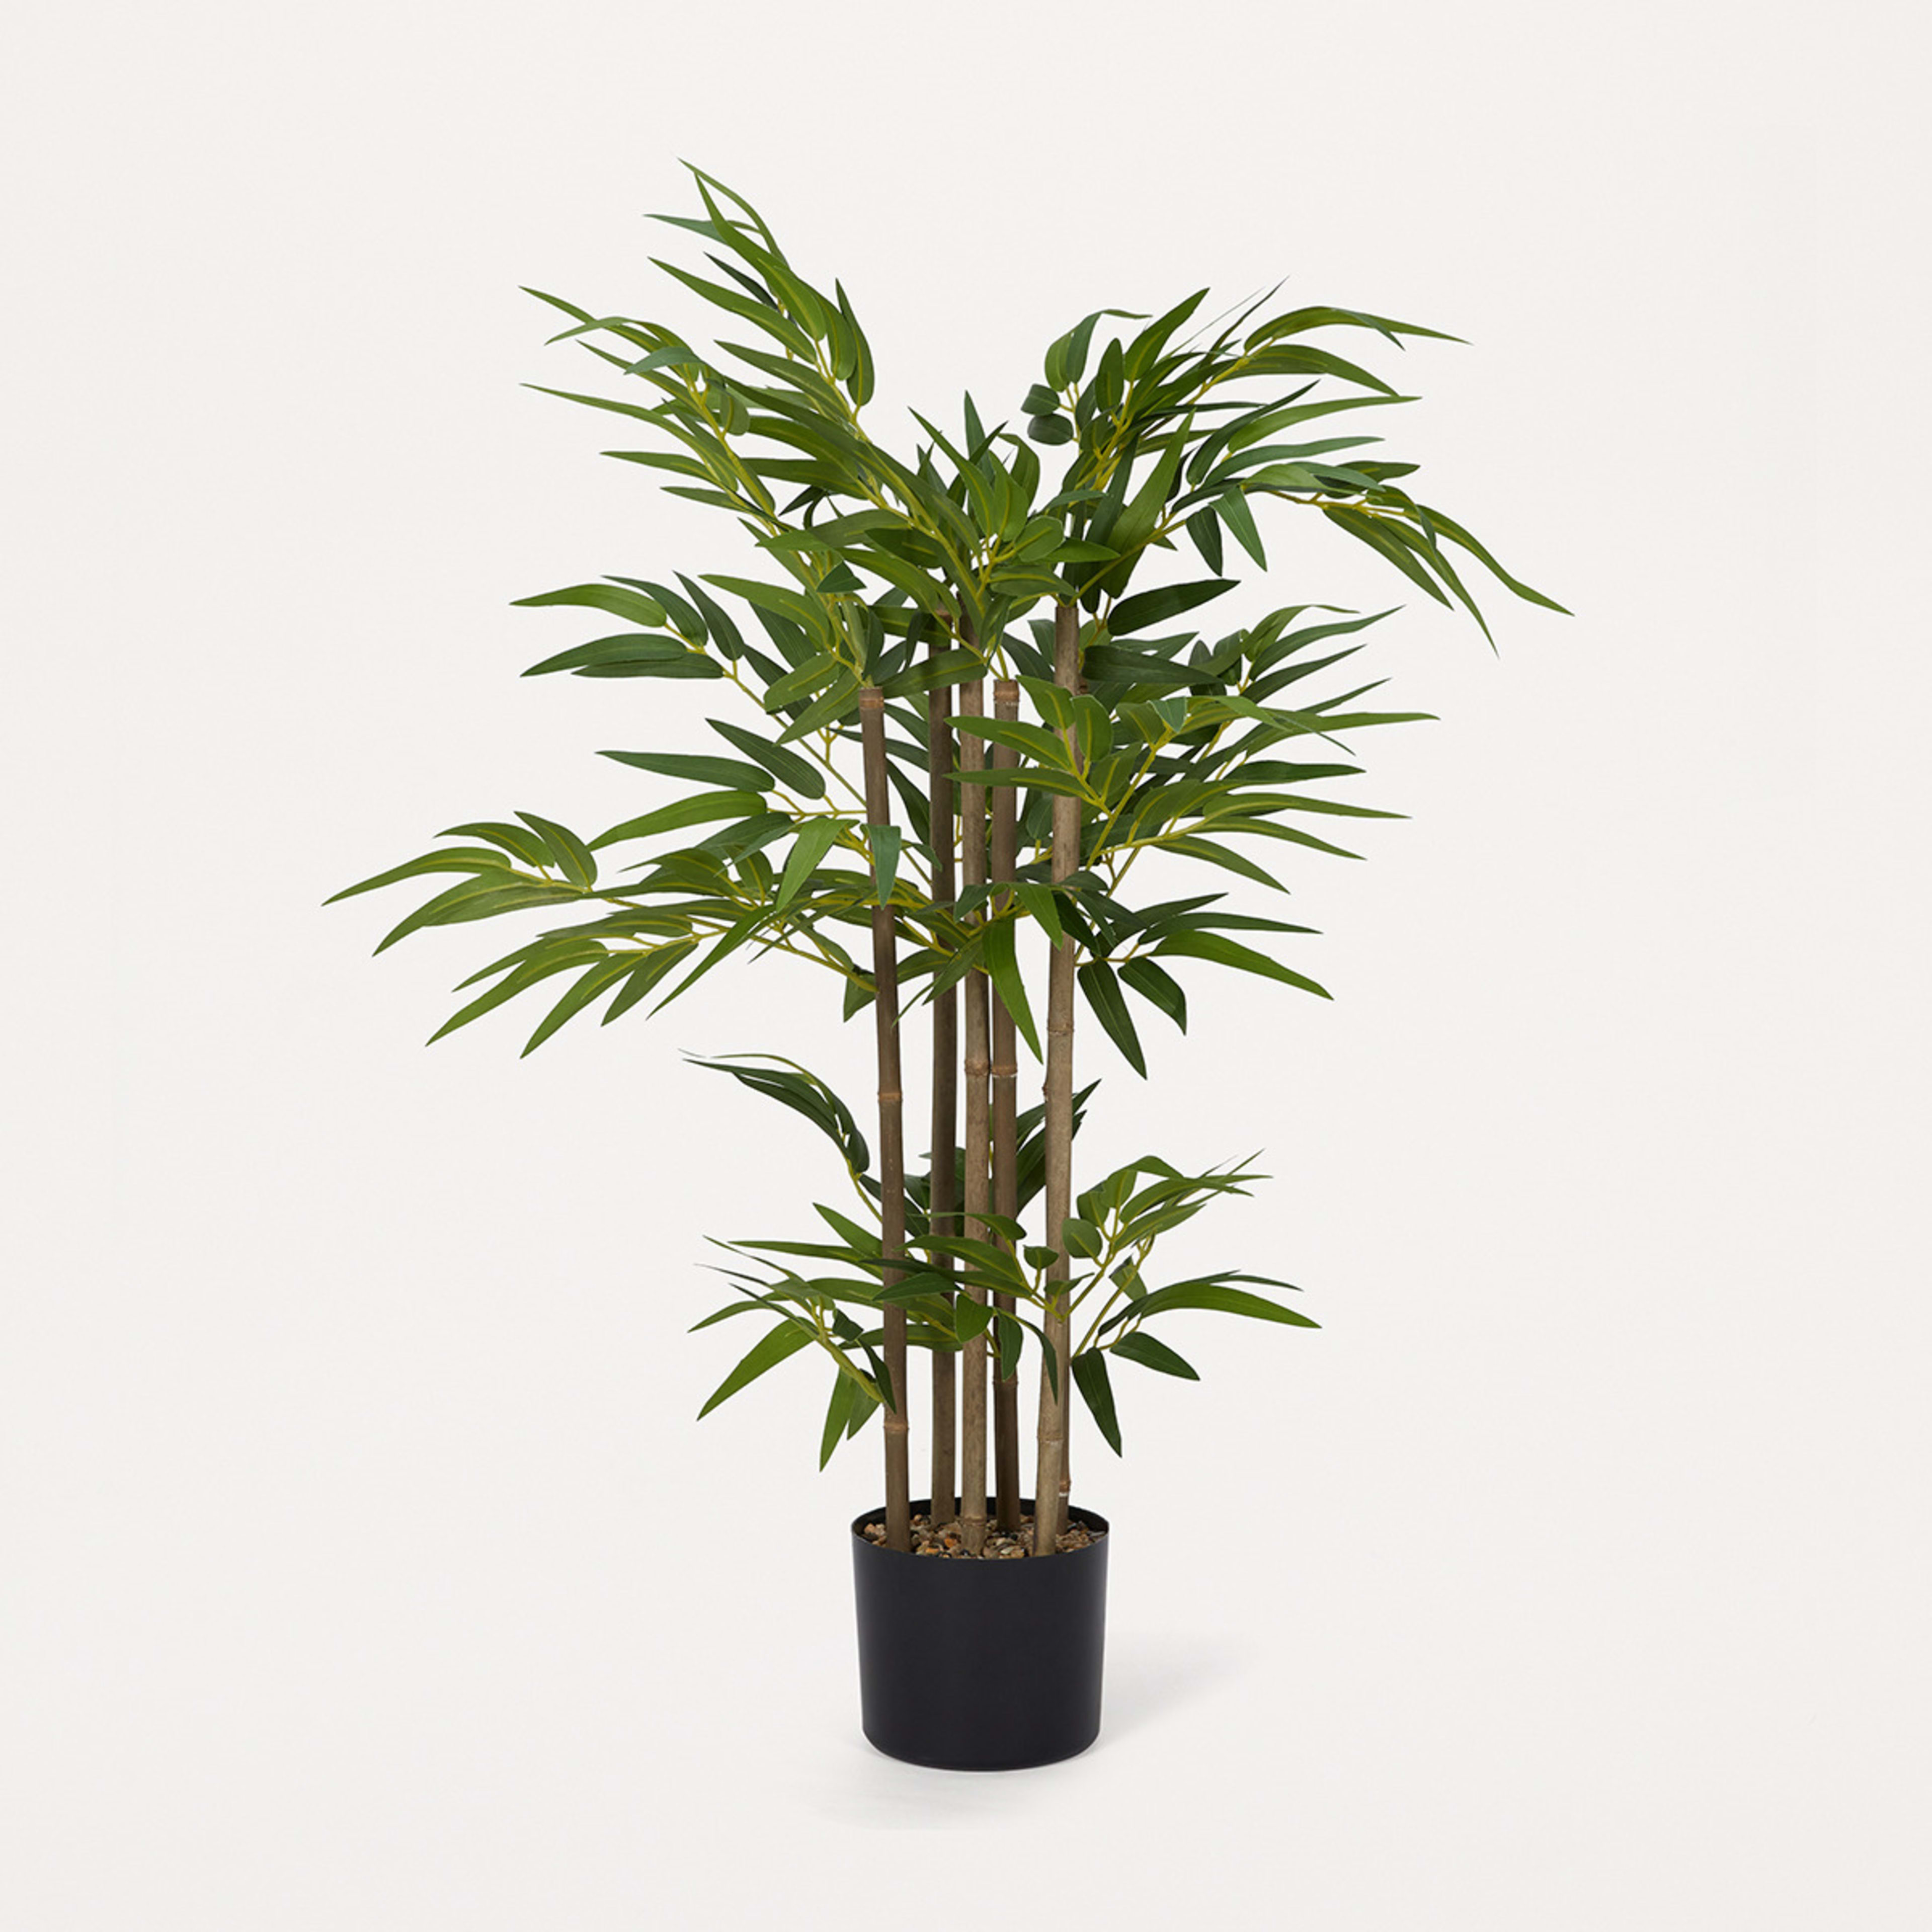 Artificial Bamboo Plant Kmart